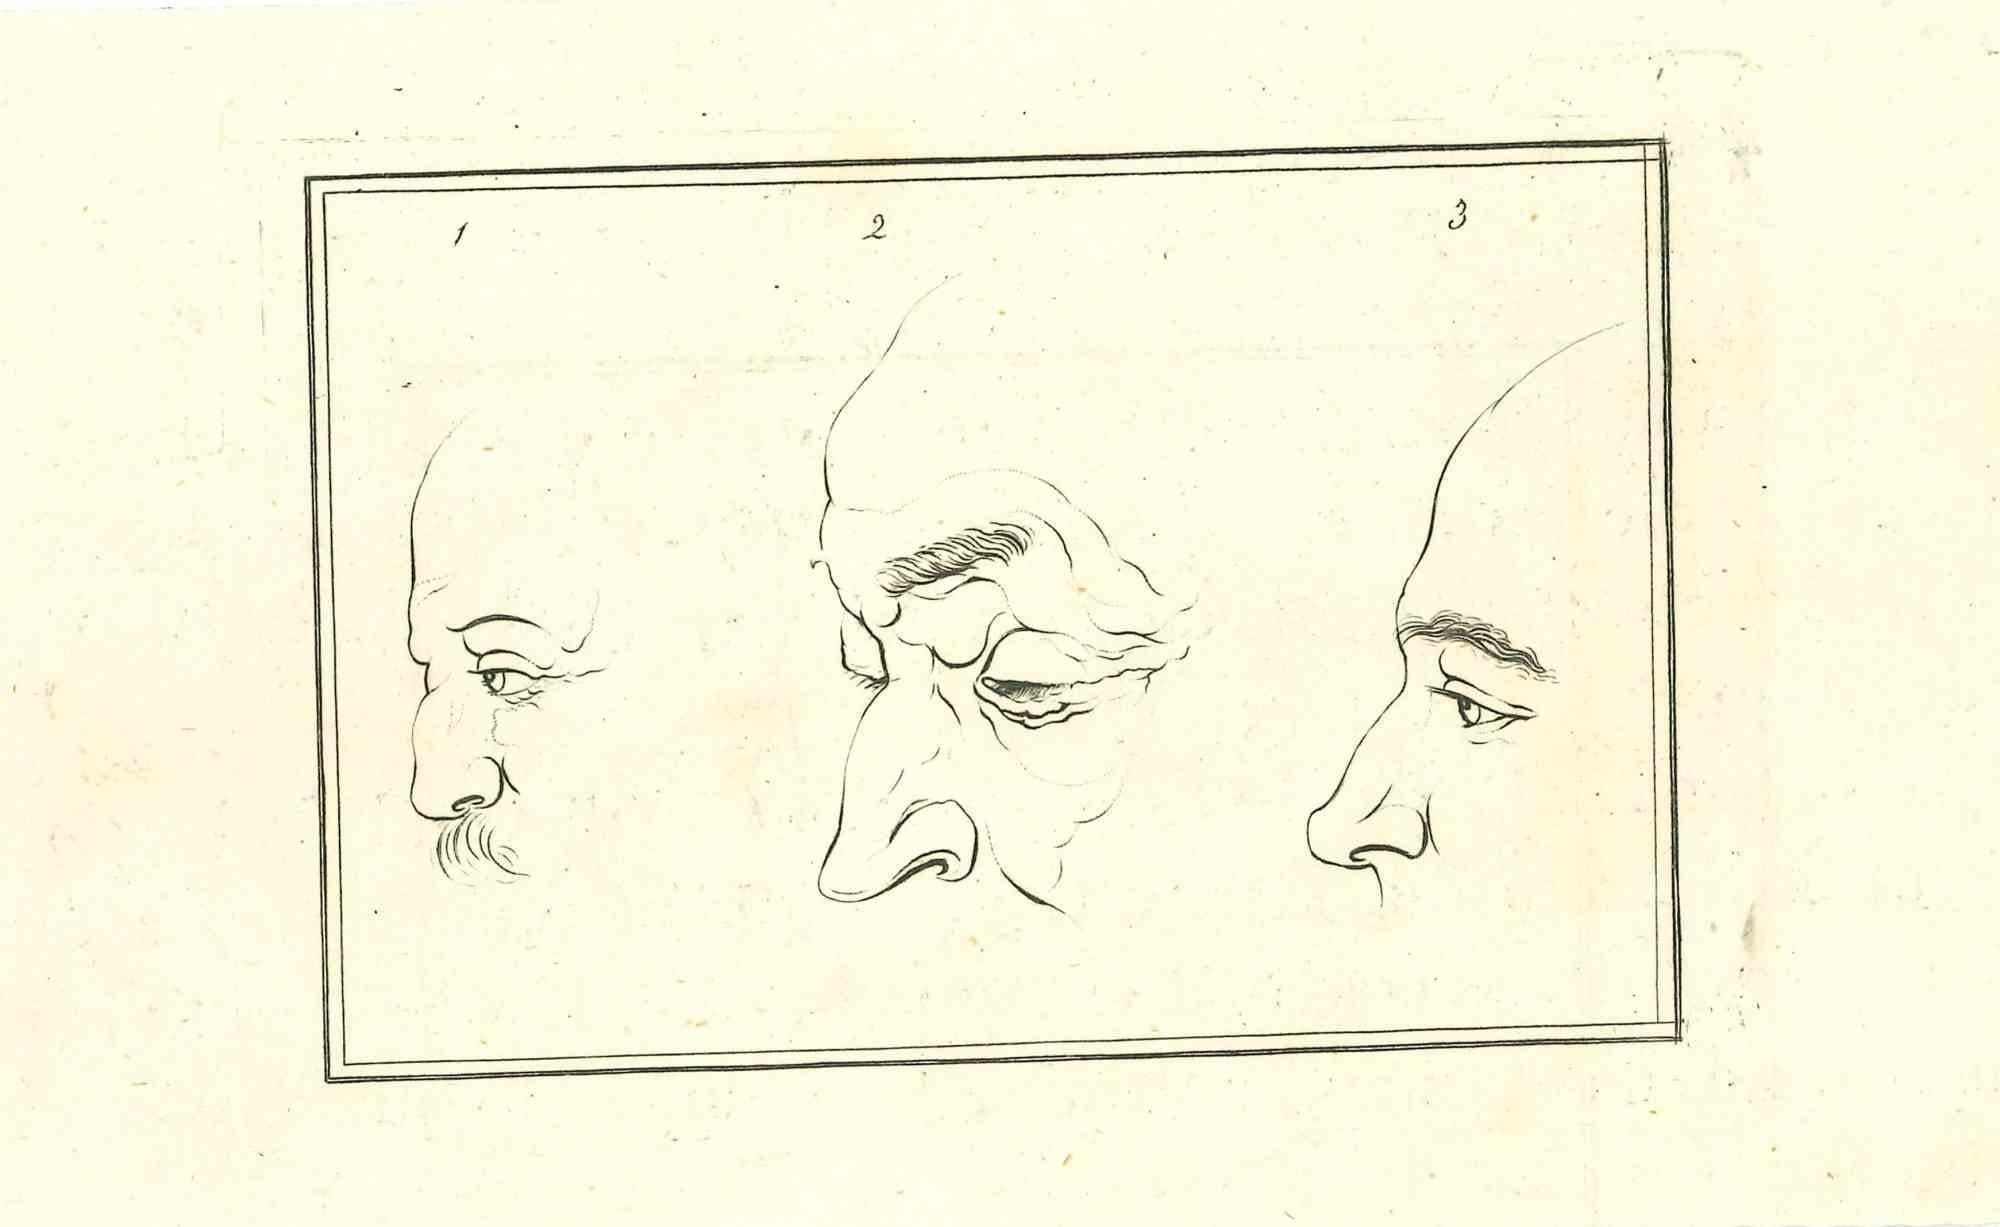 The Physiognomy - Profile is an original etching artwork realized by Thomas Holloway for Johann Caspar Lavater's "Essays on Physiognomy, Designed to Promote the Knowledge and the Love of Mankind", London, Bensley, 1810. 

Good conditions.

With